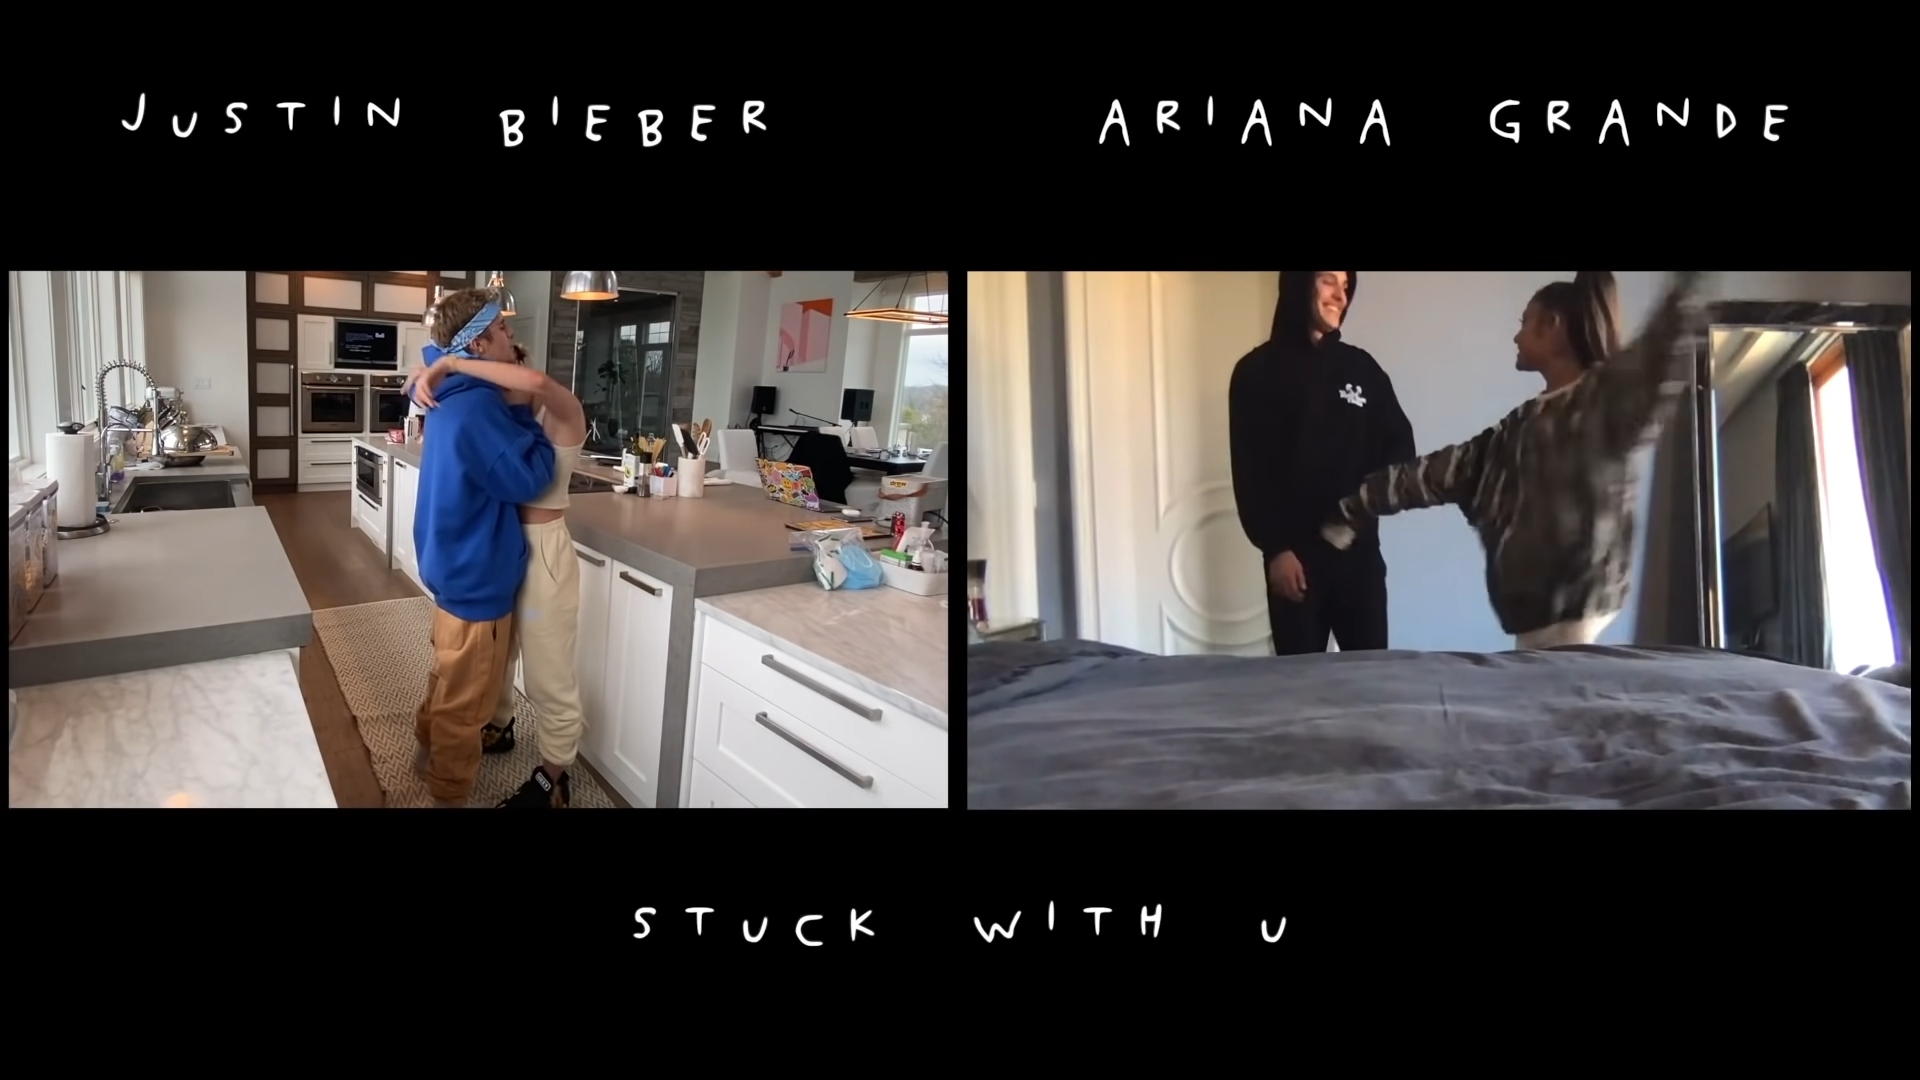 justin bieber and ariana grande dancing with their spouses (at the time) in their &quot;stuck with u&quot; music video